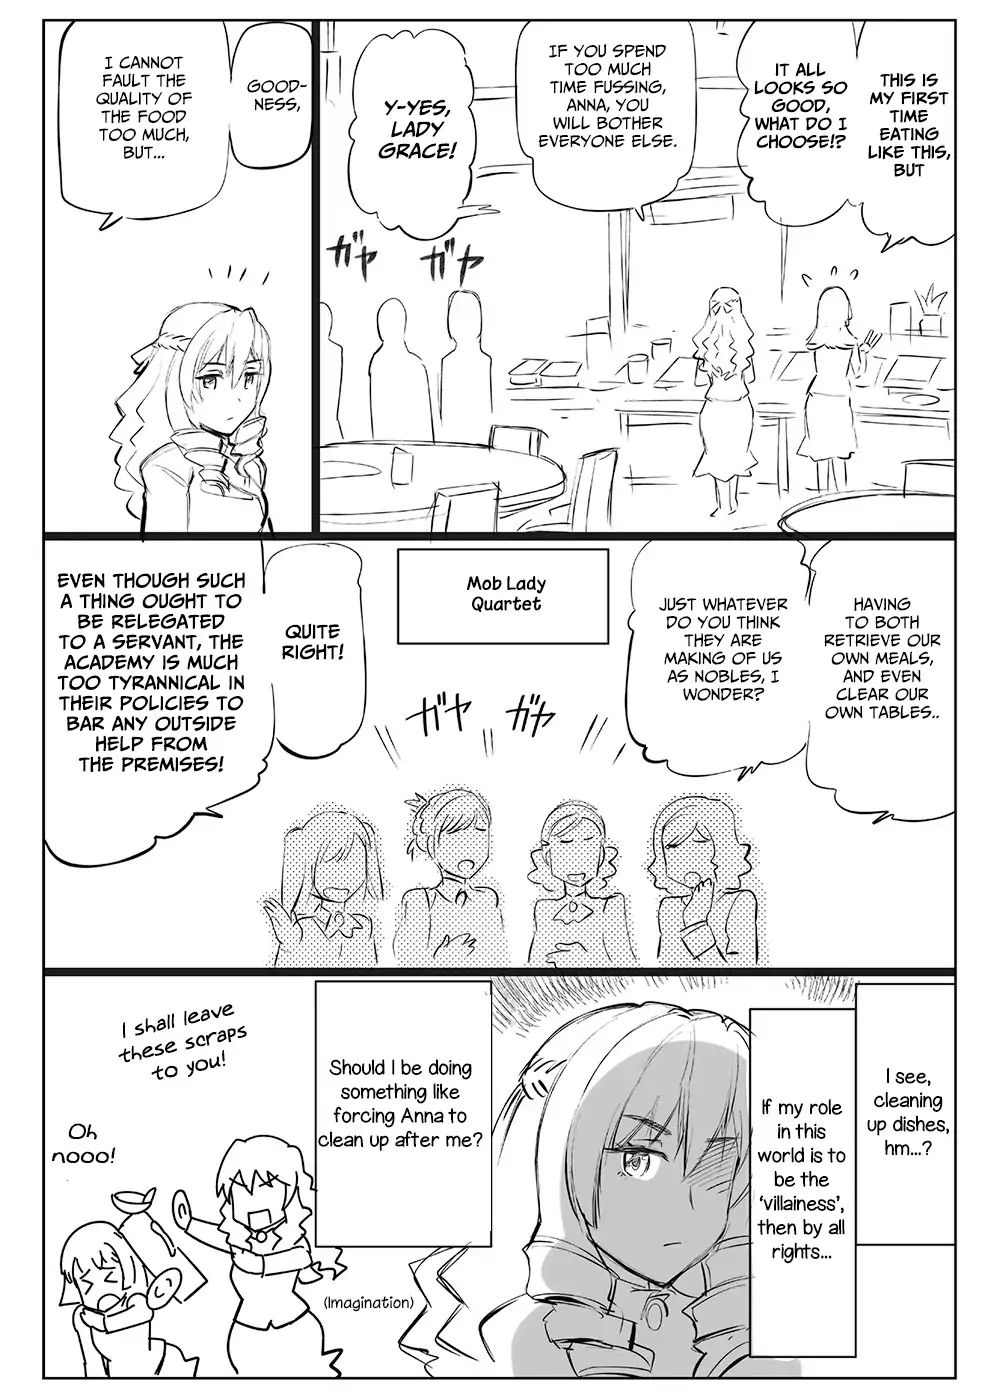 Middle-Aged Man's Noble Daughter Reincarnation - Page 2